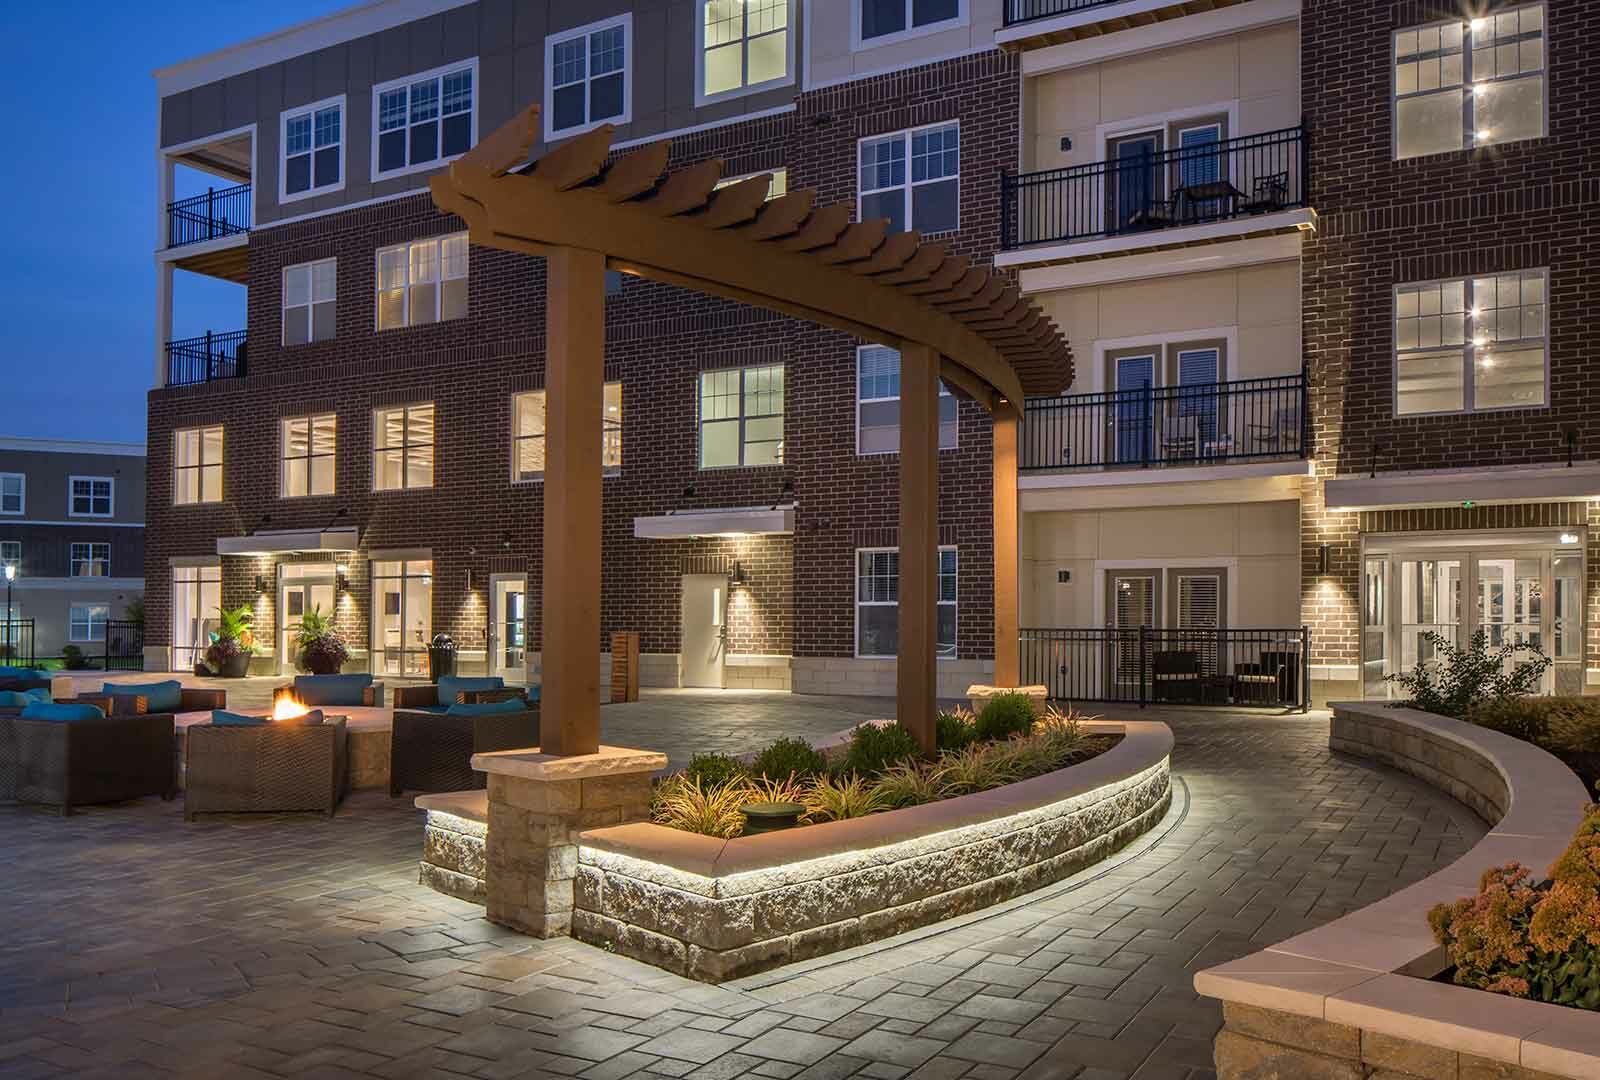 Furnished outdoor community space at Savoy of West Chester.